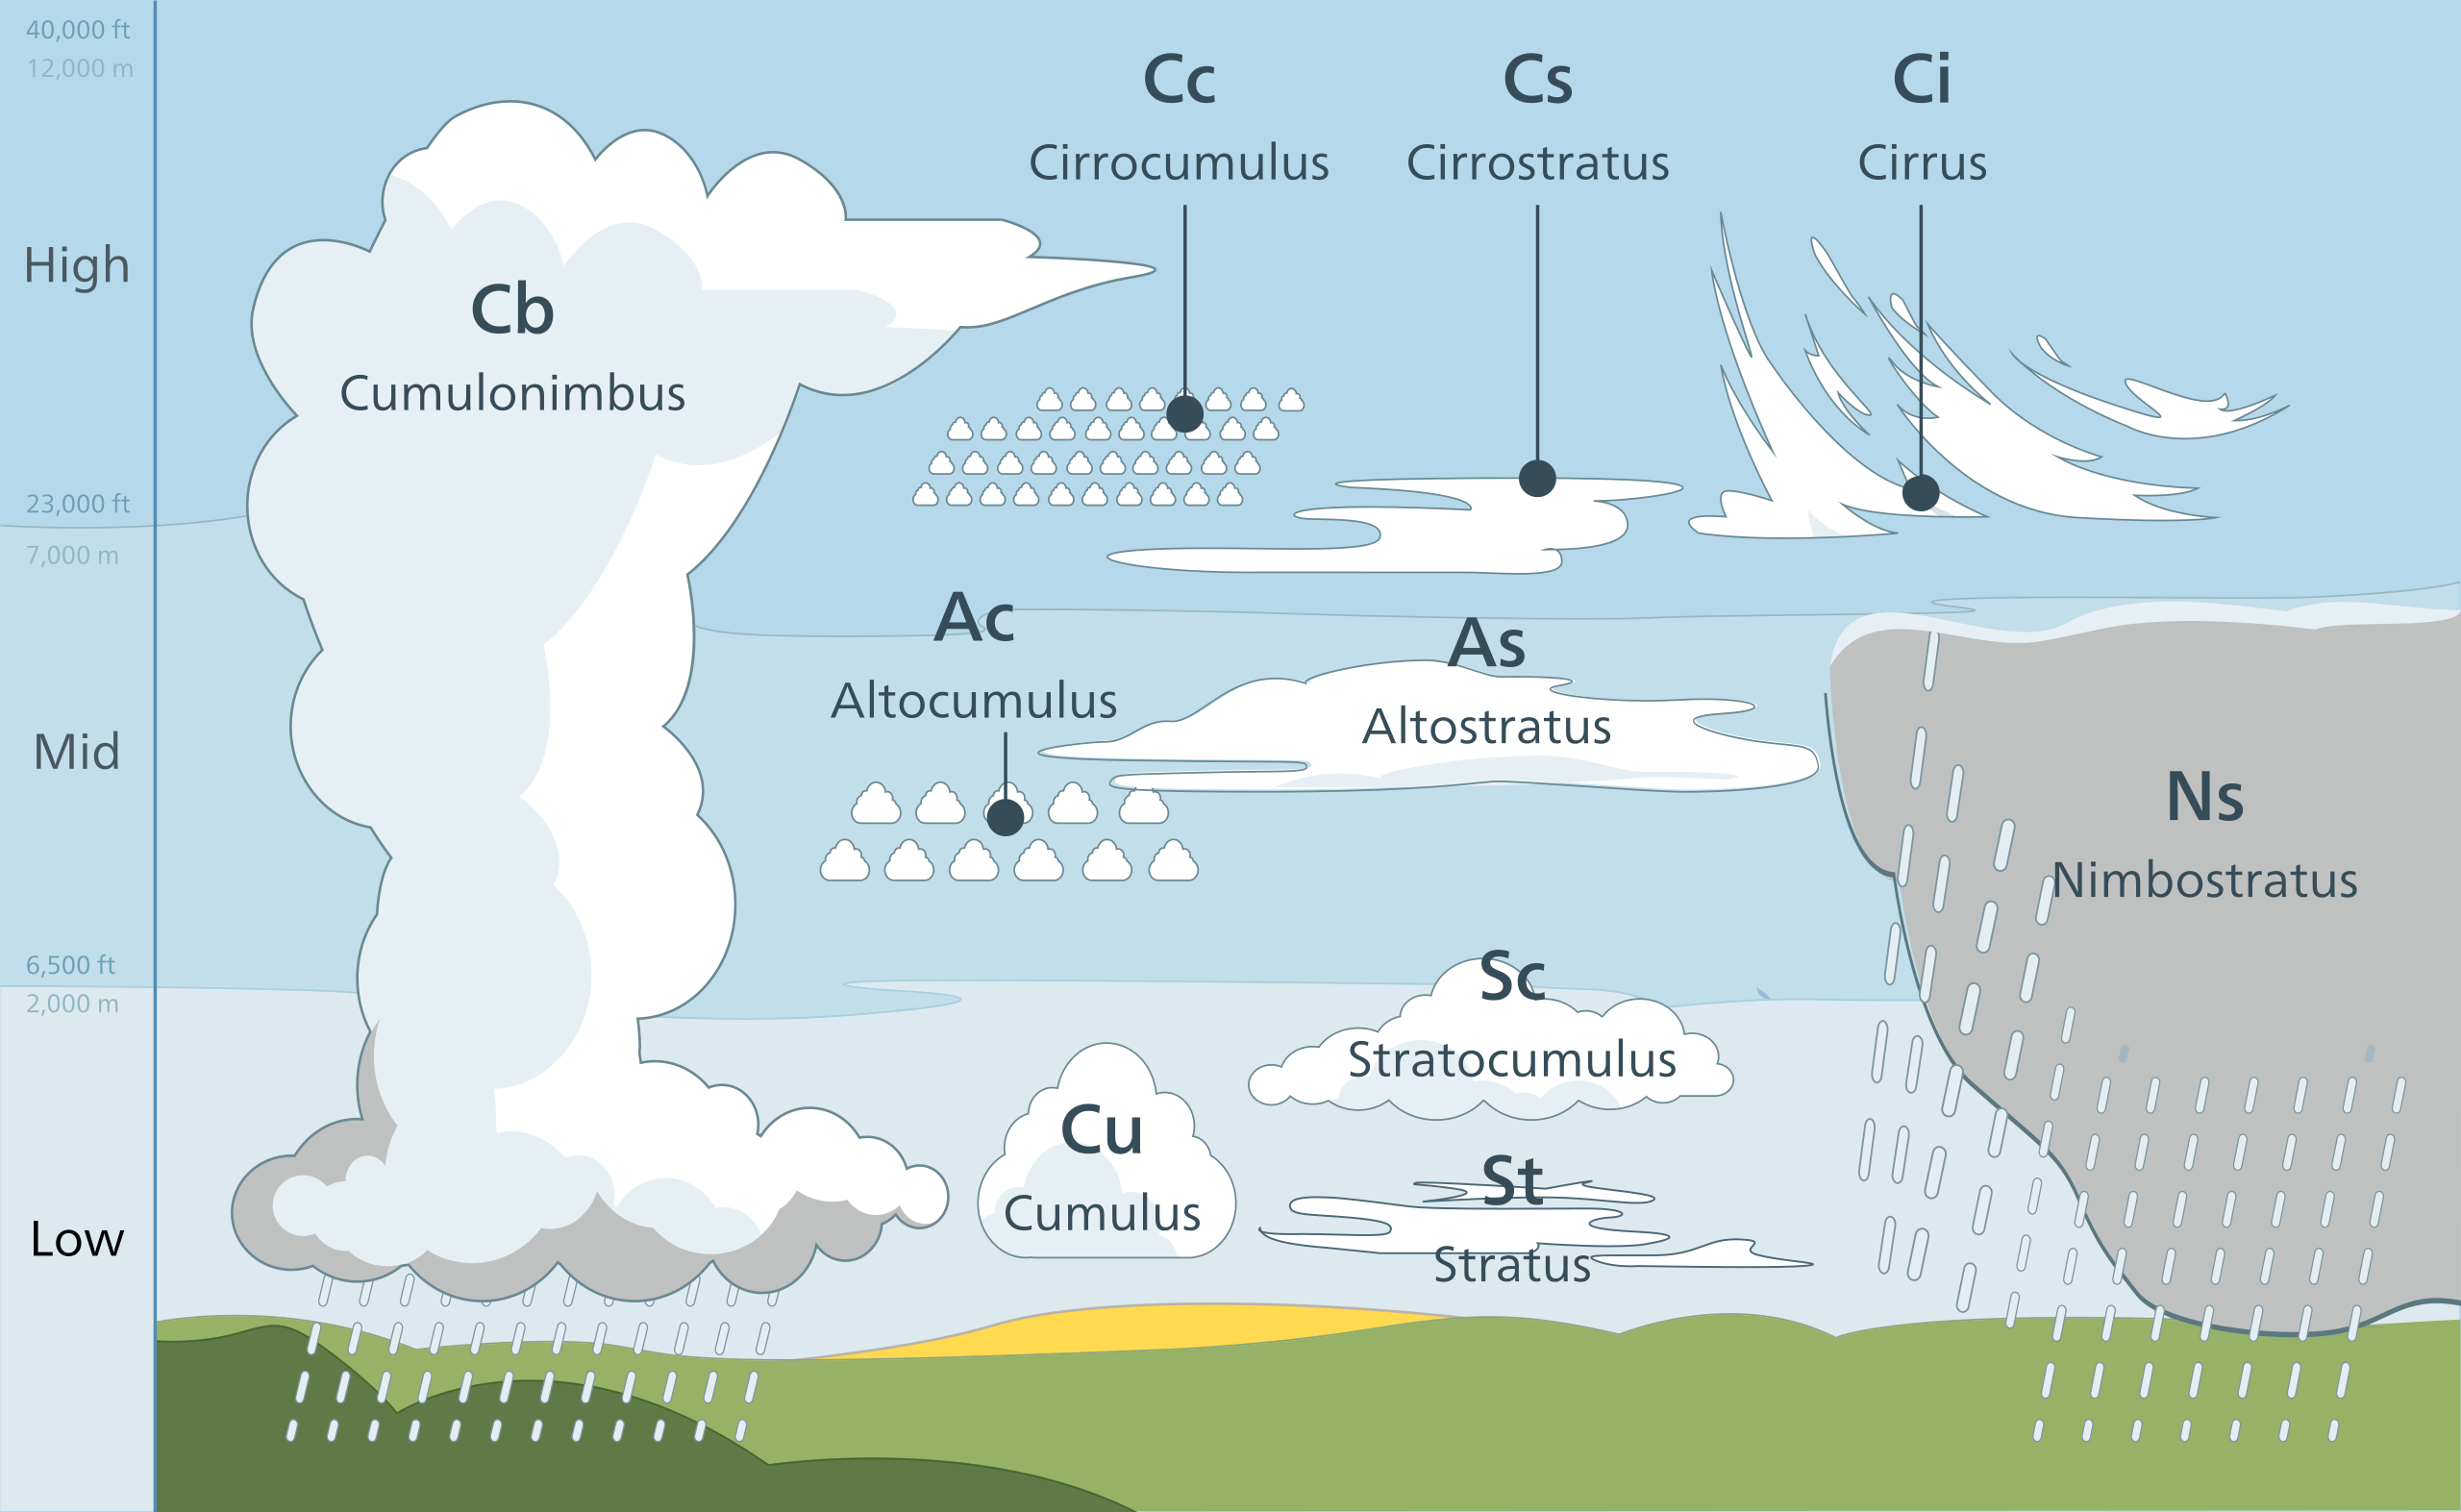 Tropospheric cloud classification by altitude of occurrence.